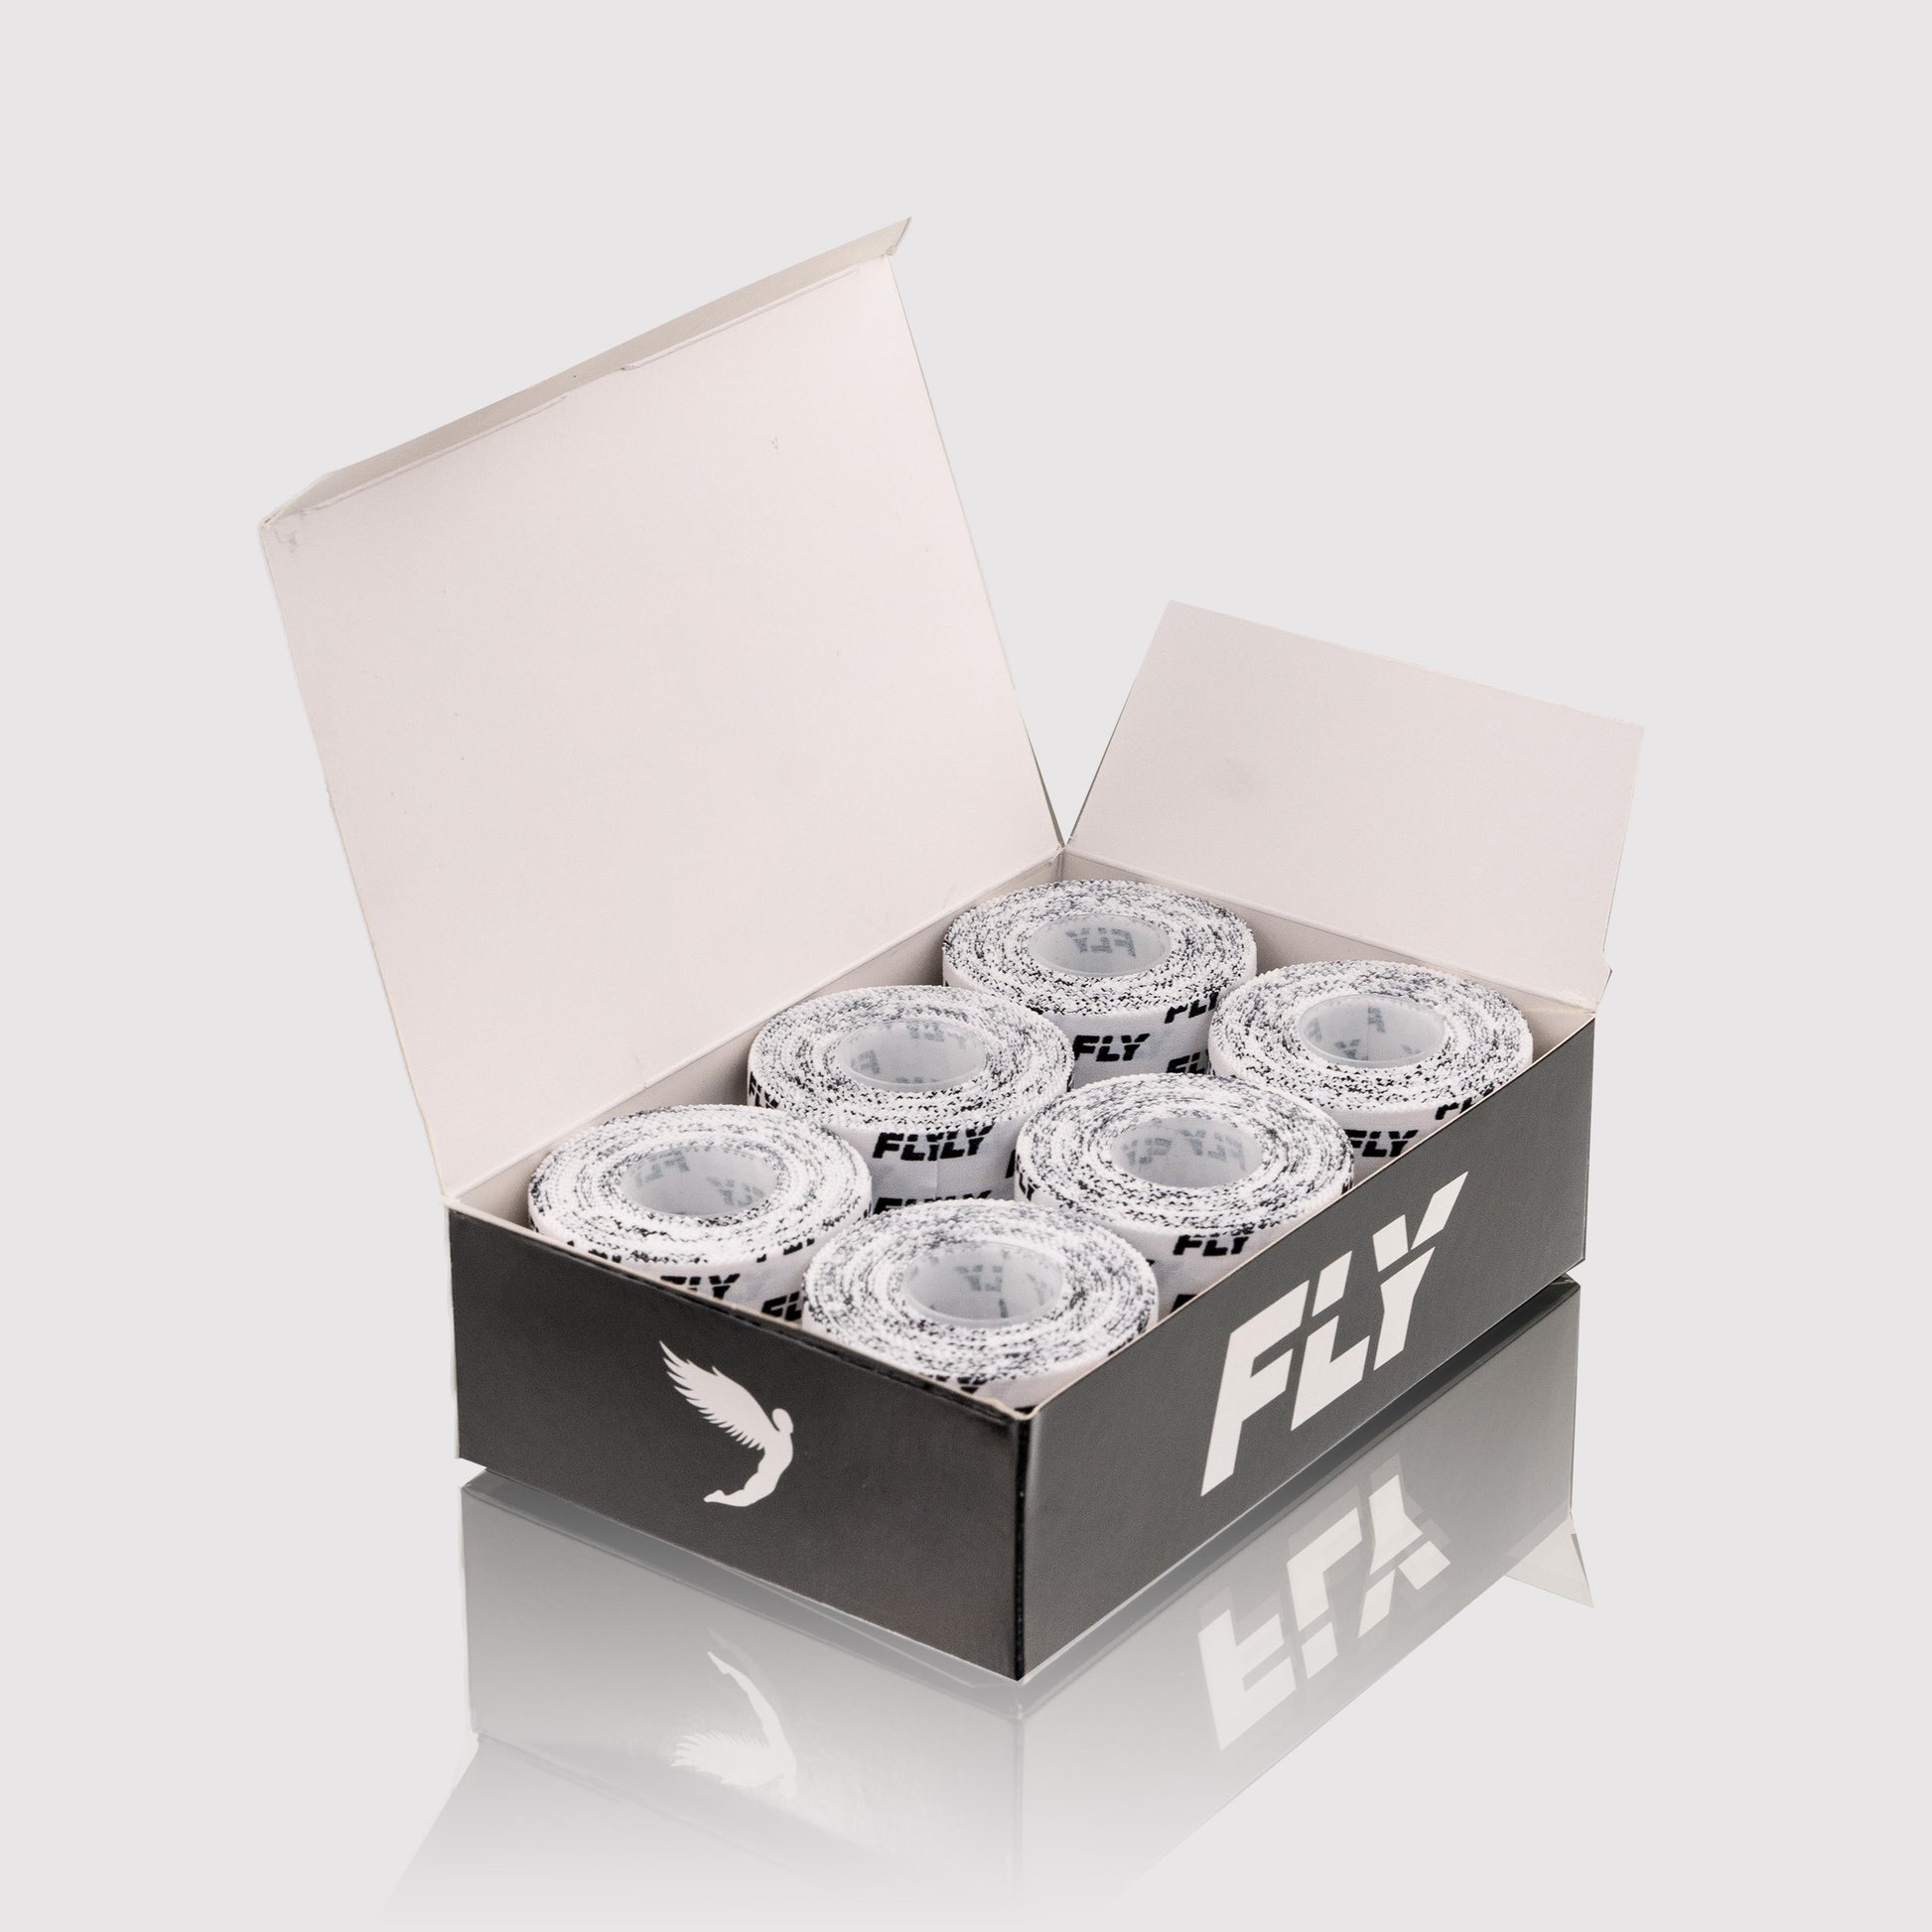 Performance Tape 1 Inch (Box of 12) (8099531358460) (8172124799220)